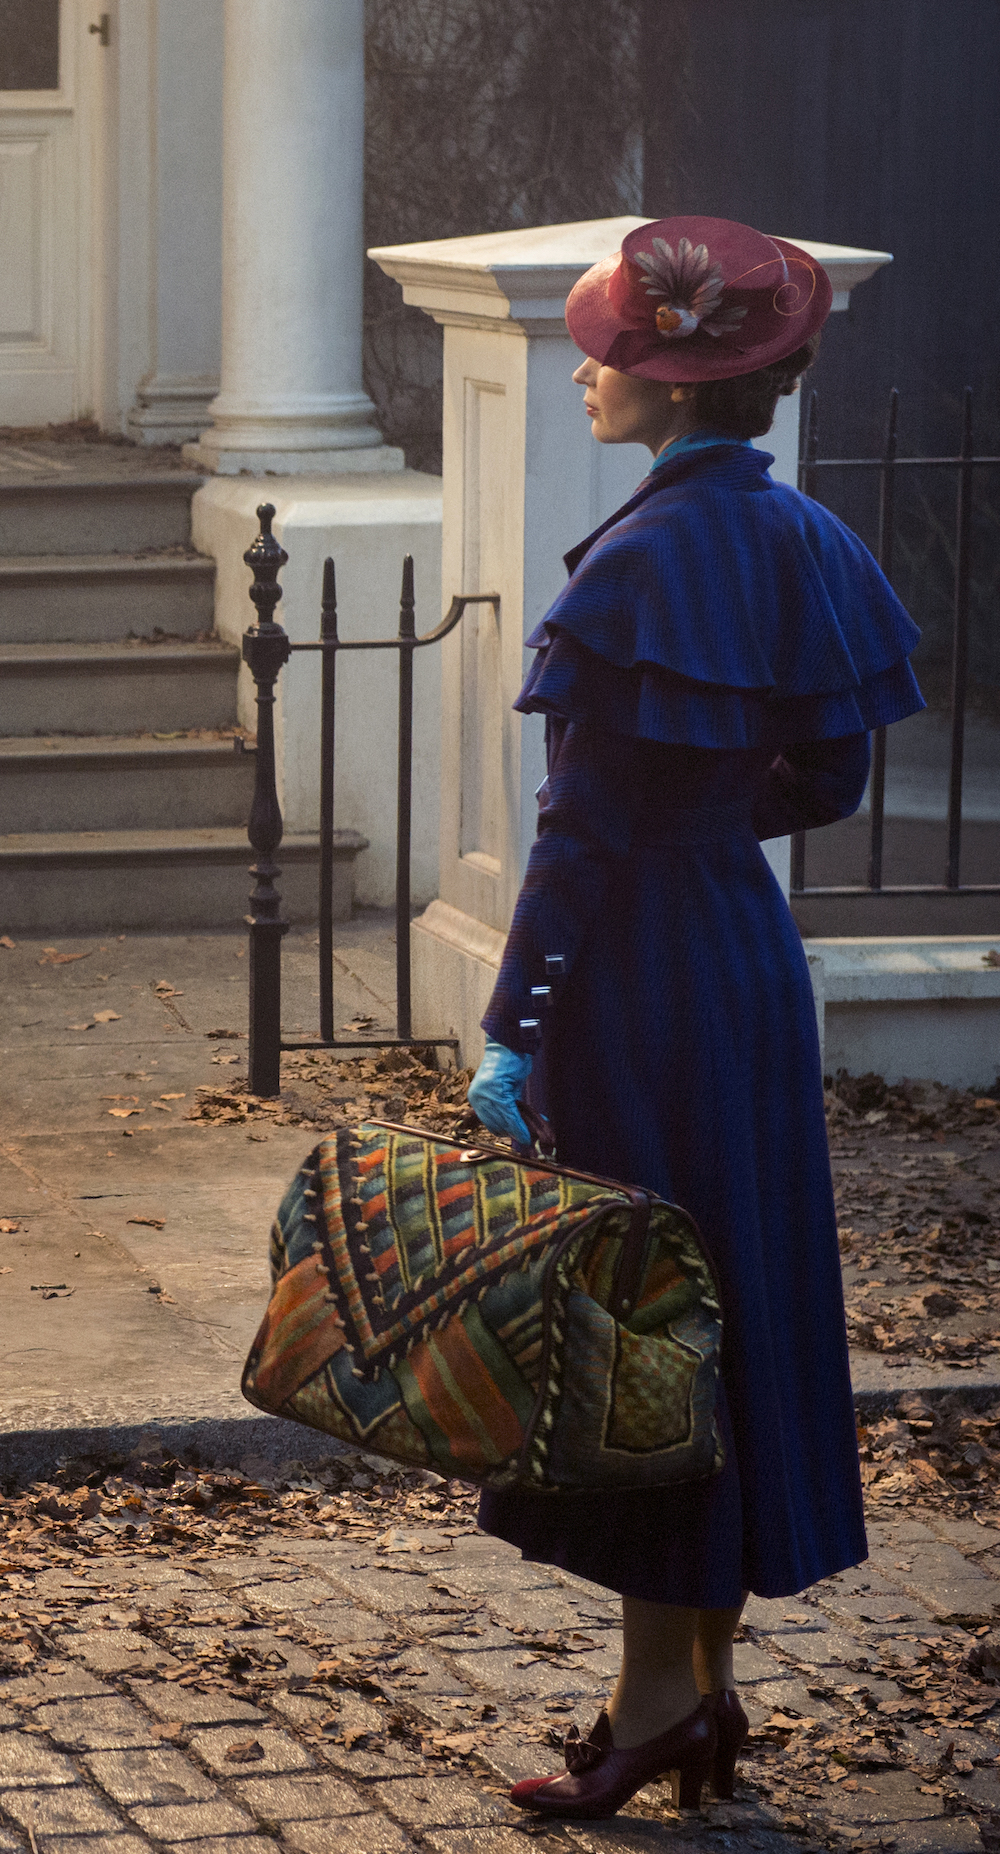 Mary Poppins stands outside Banks home